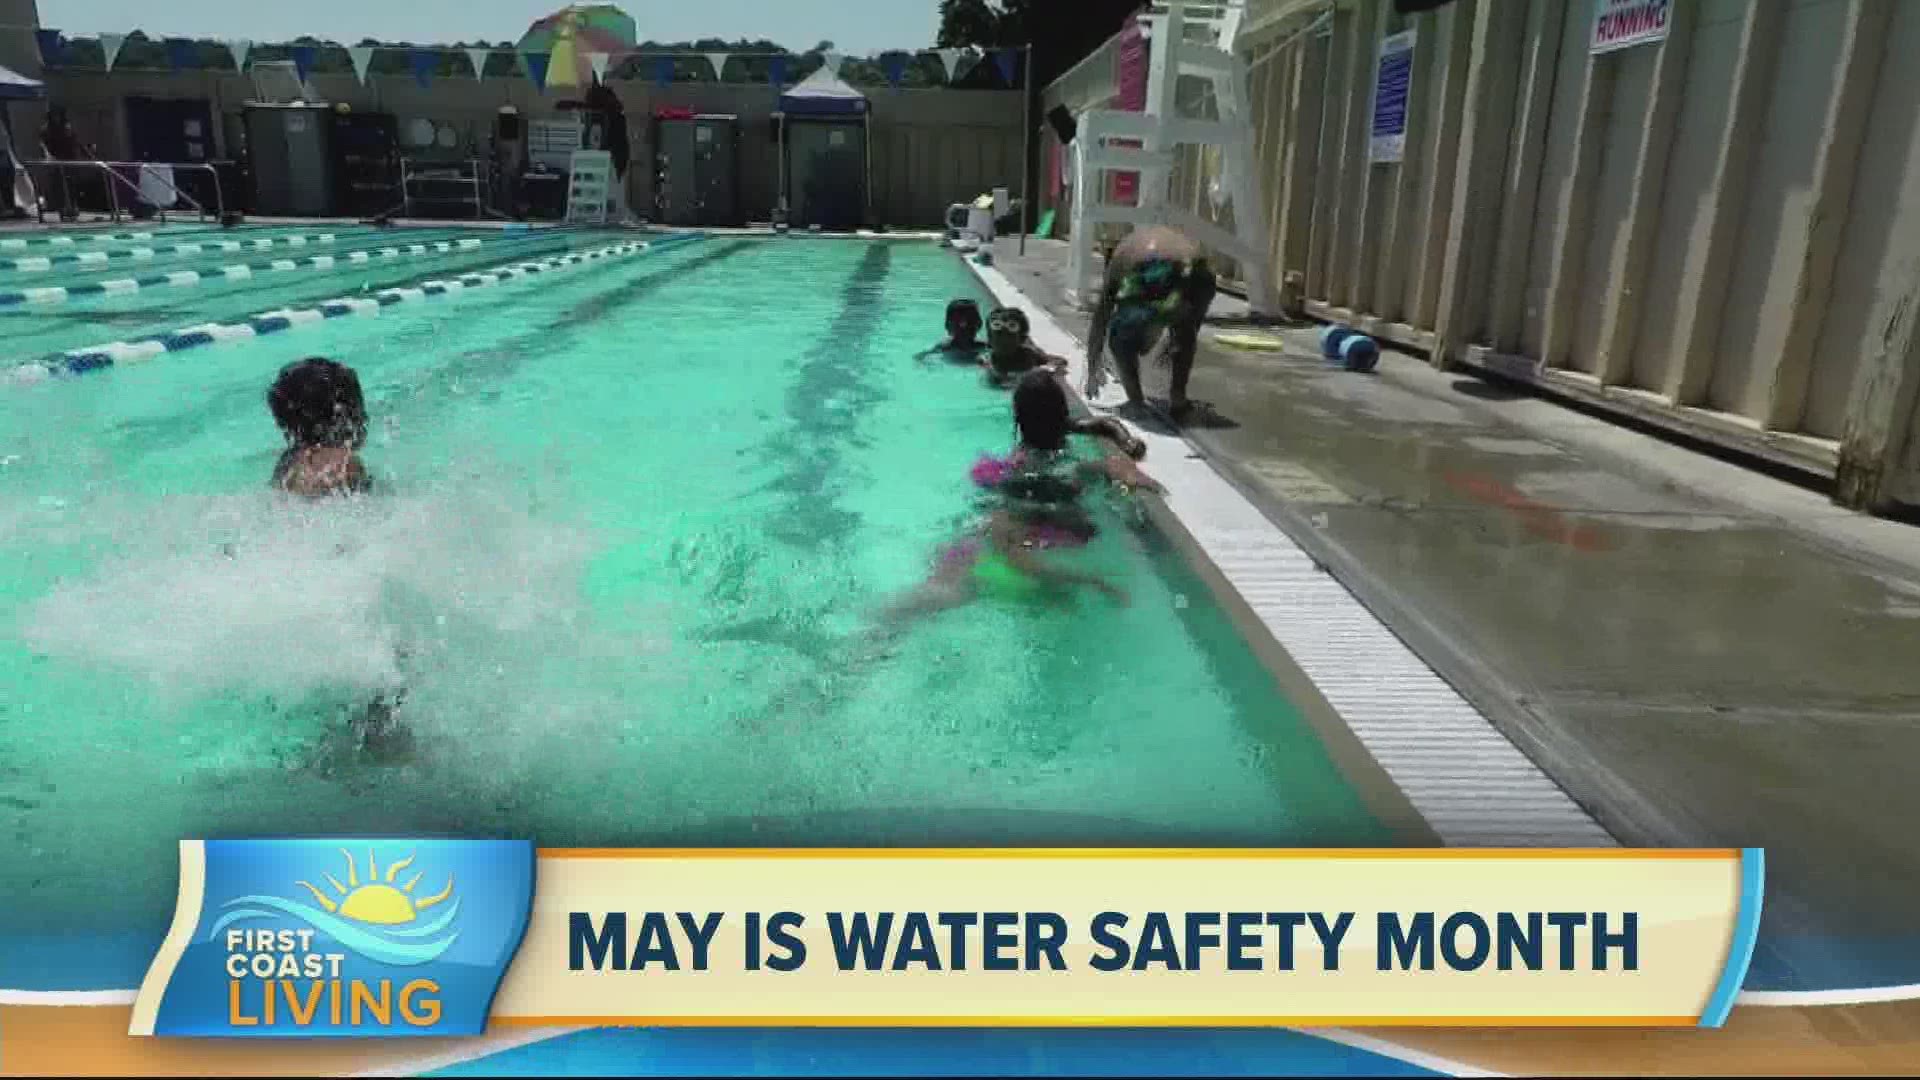 The temperatures are heating up and while a lot of us are itching to take advantage, there are some things to keep in mind when it comes to safety around water.